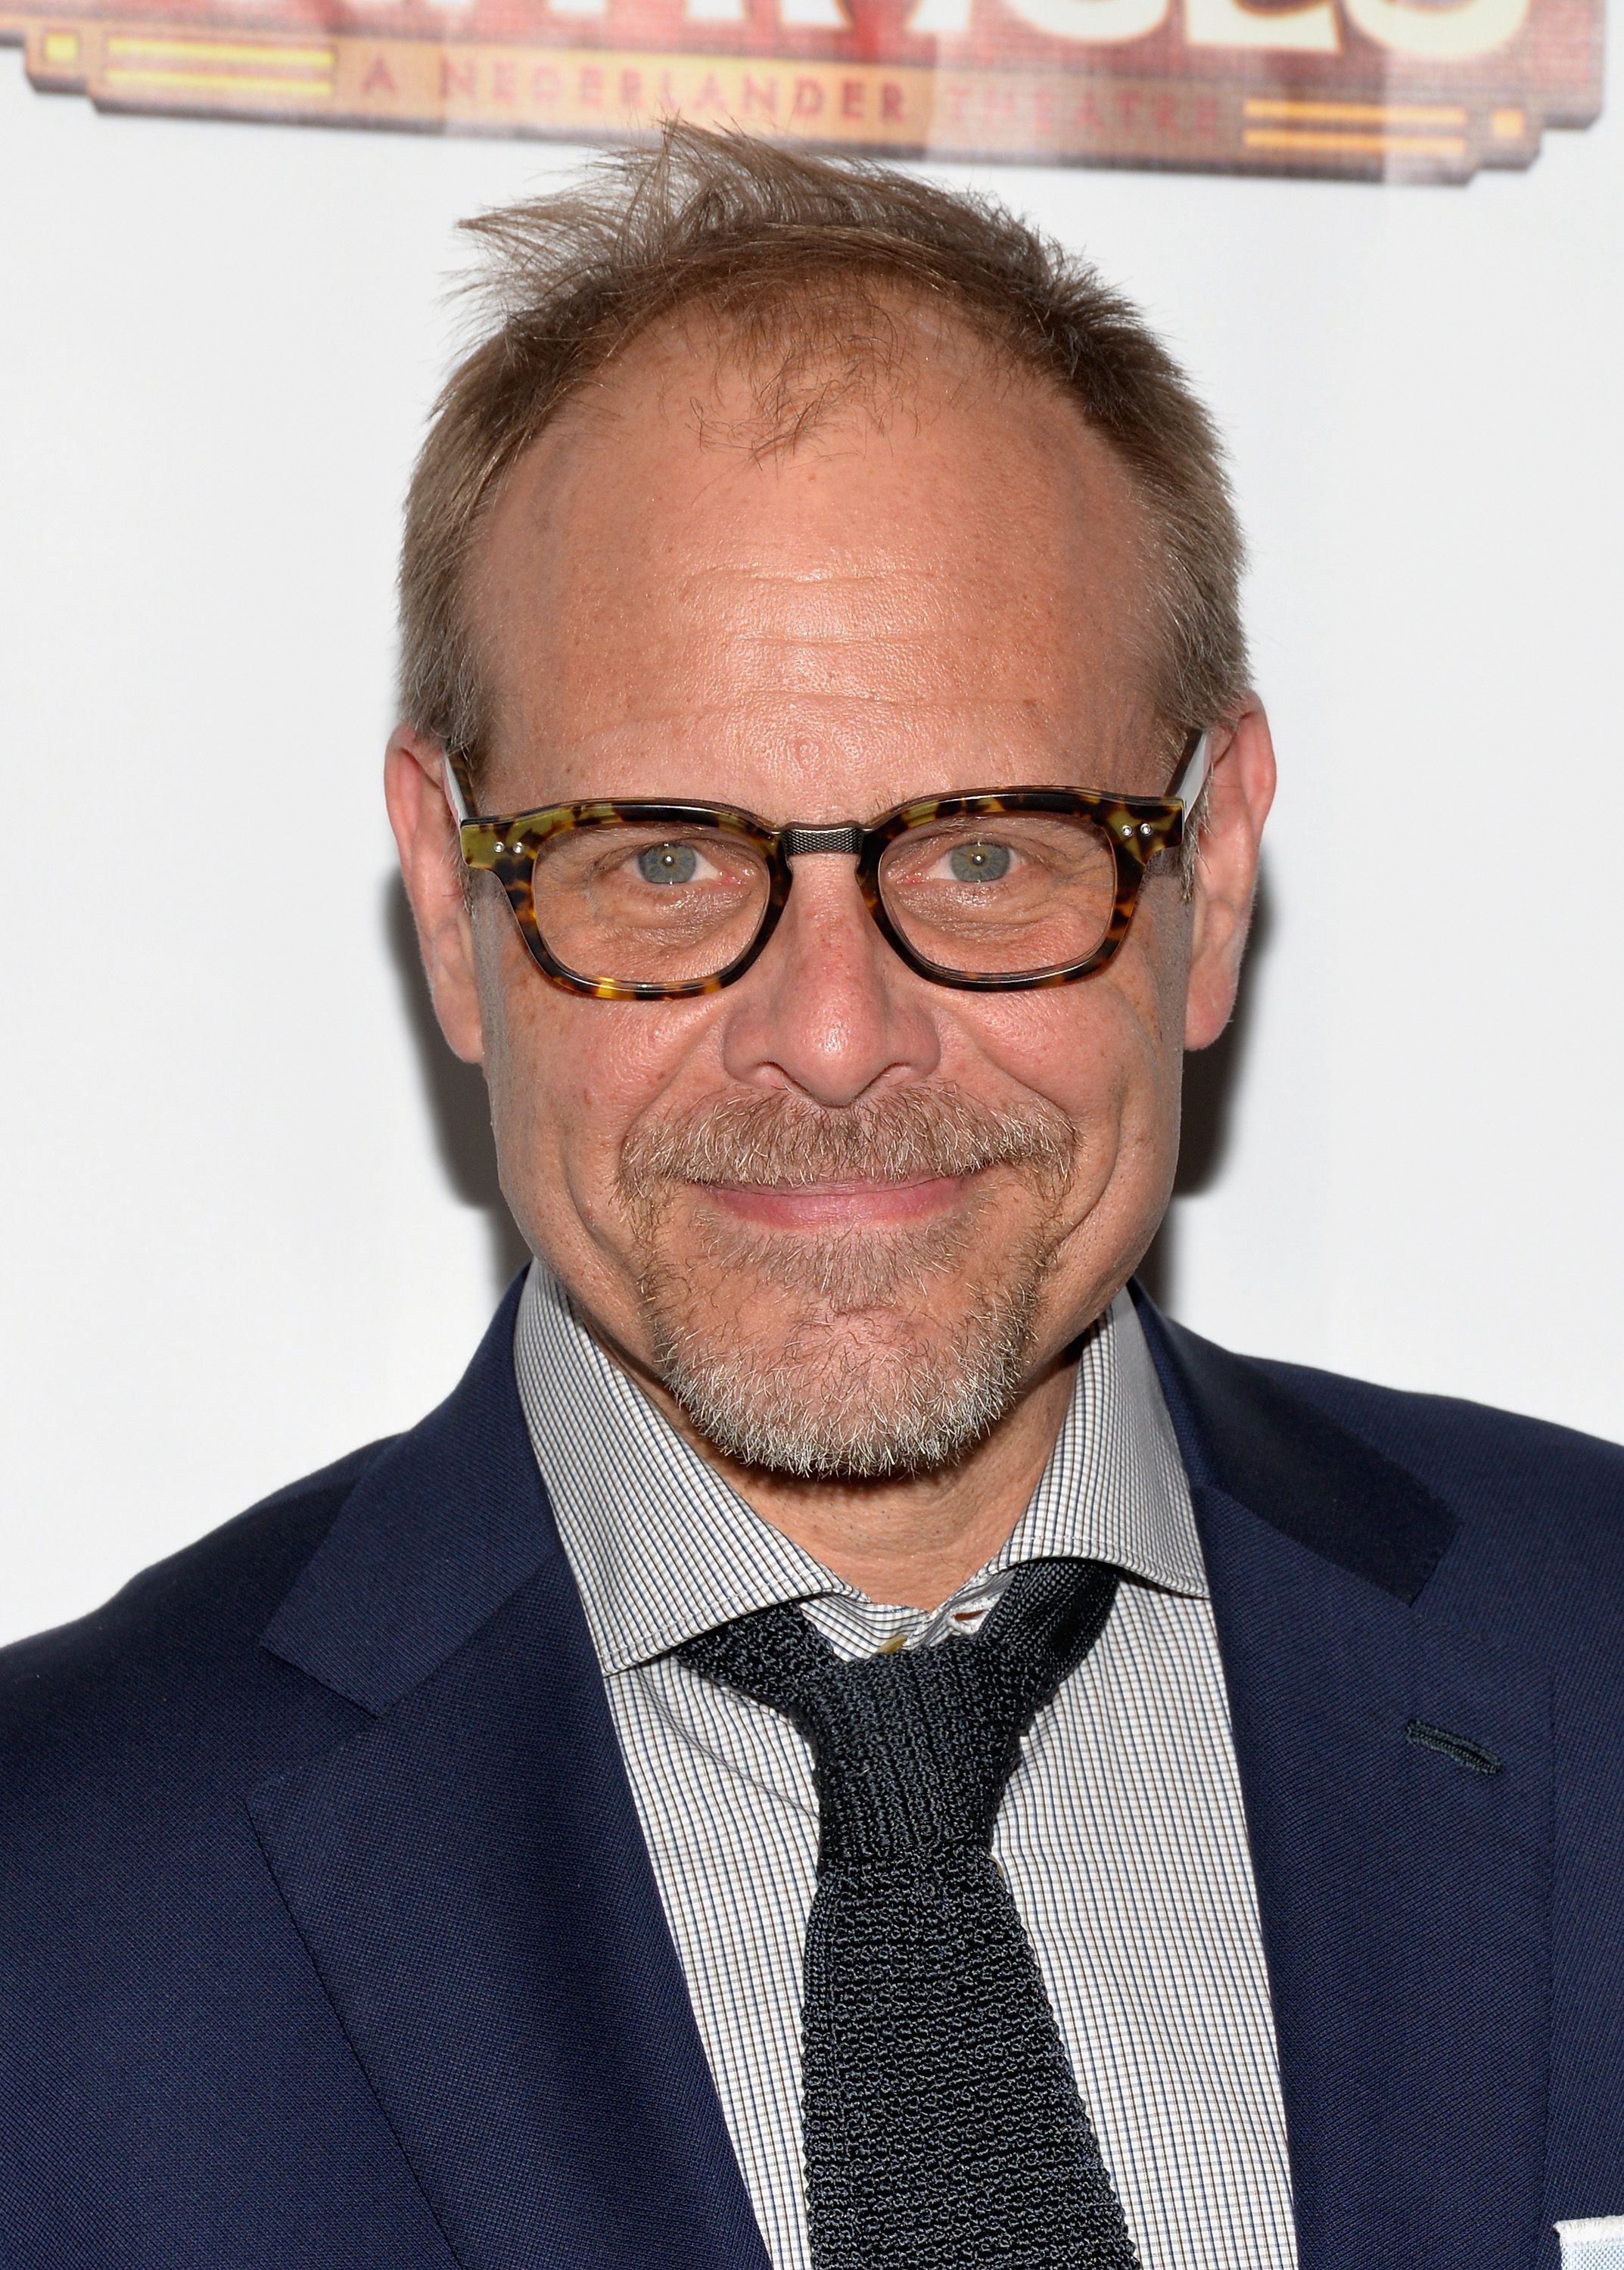 Things You Don't Know About Alton Brown - Good Eats Facts 